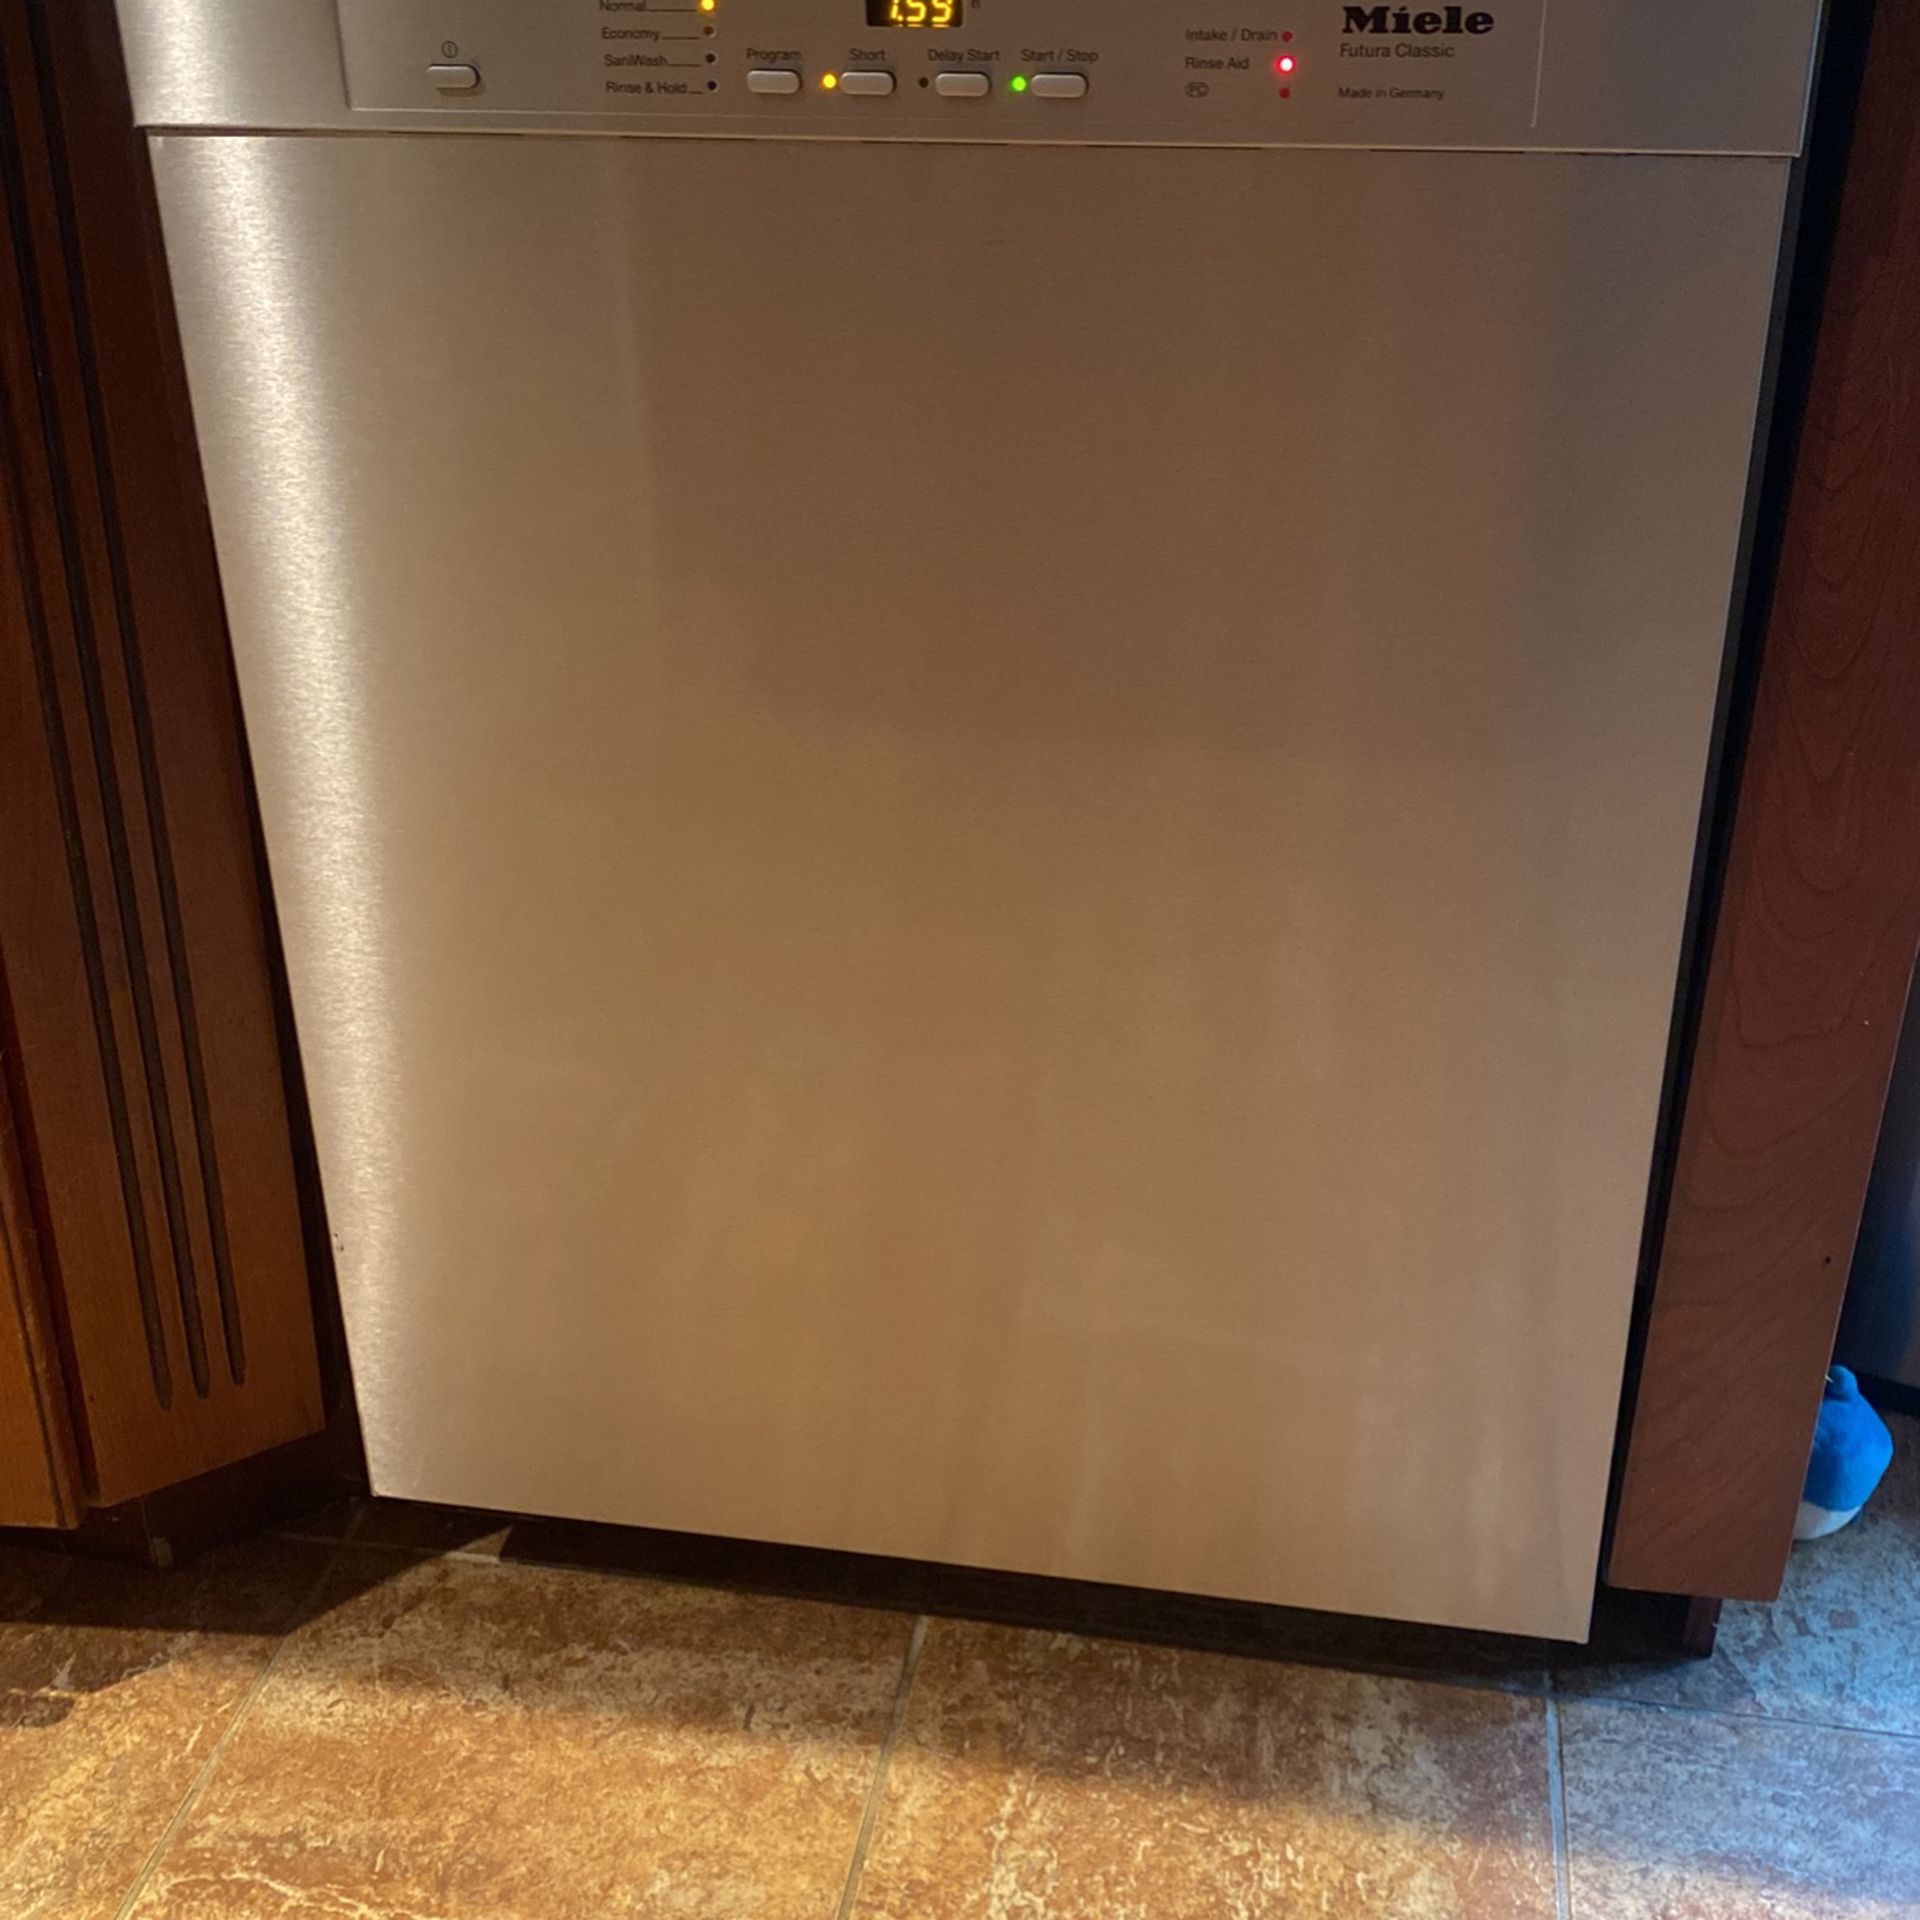 Miele Stainless Dishwasher